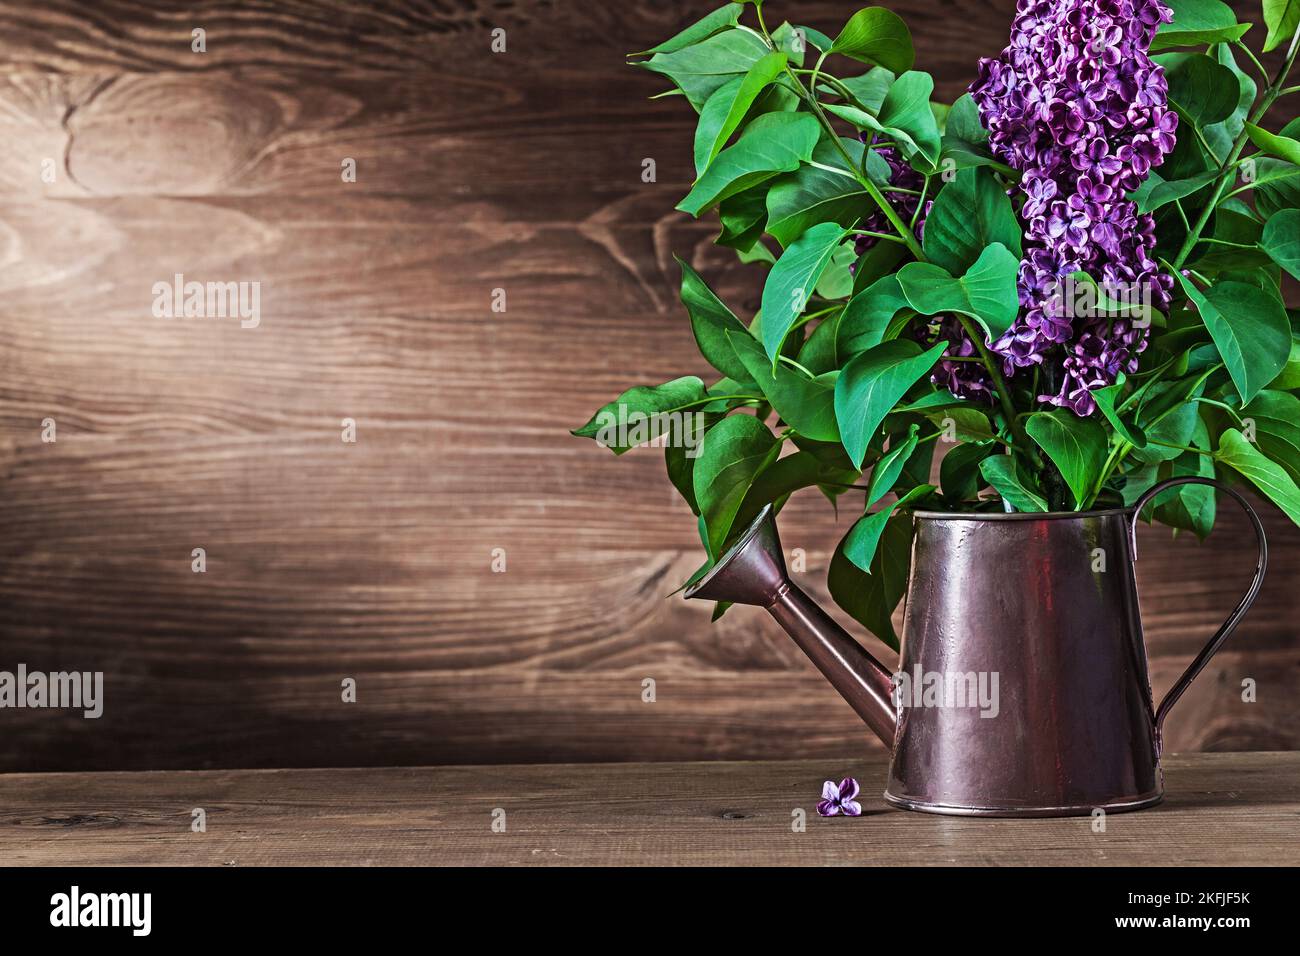 lilac flowers in vintage watering can on wood Stock Photo